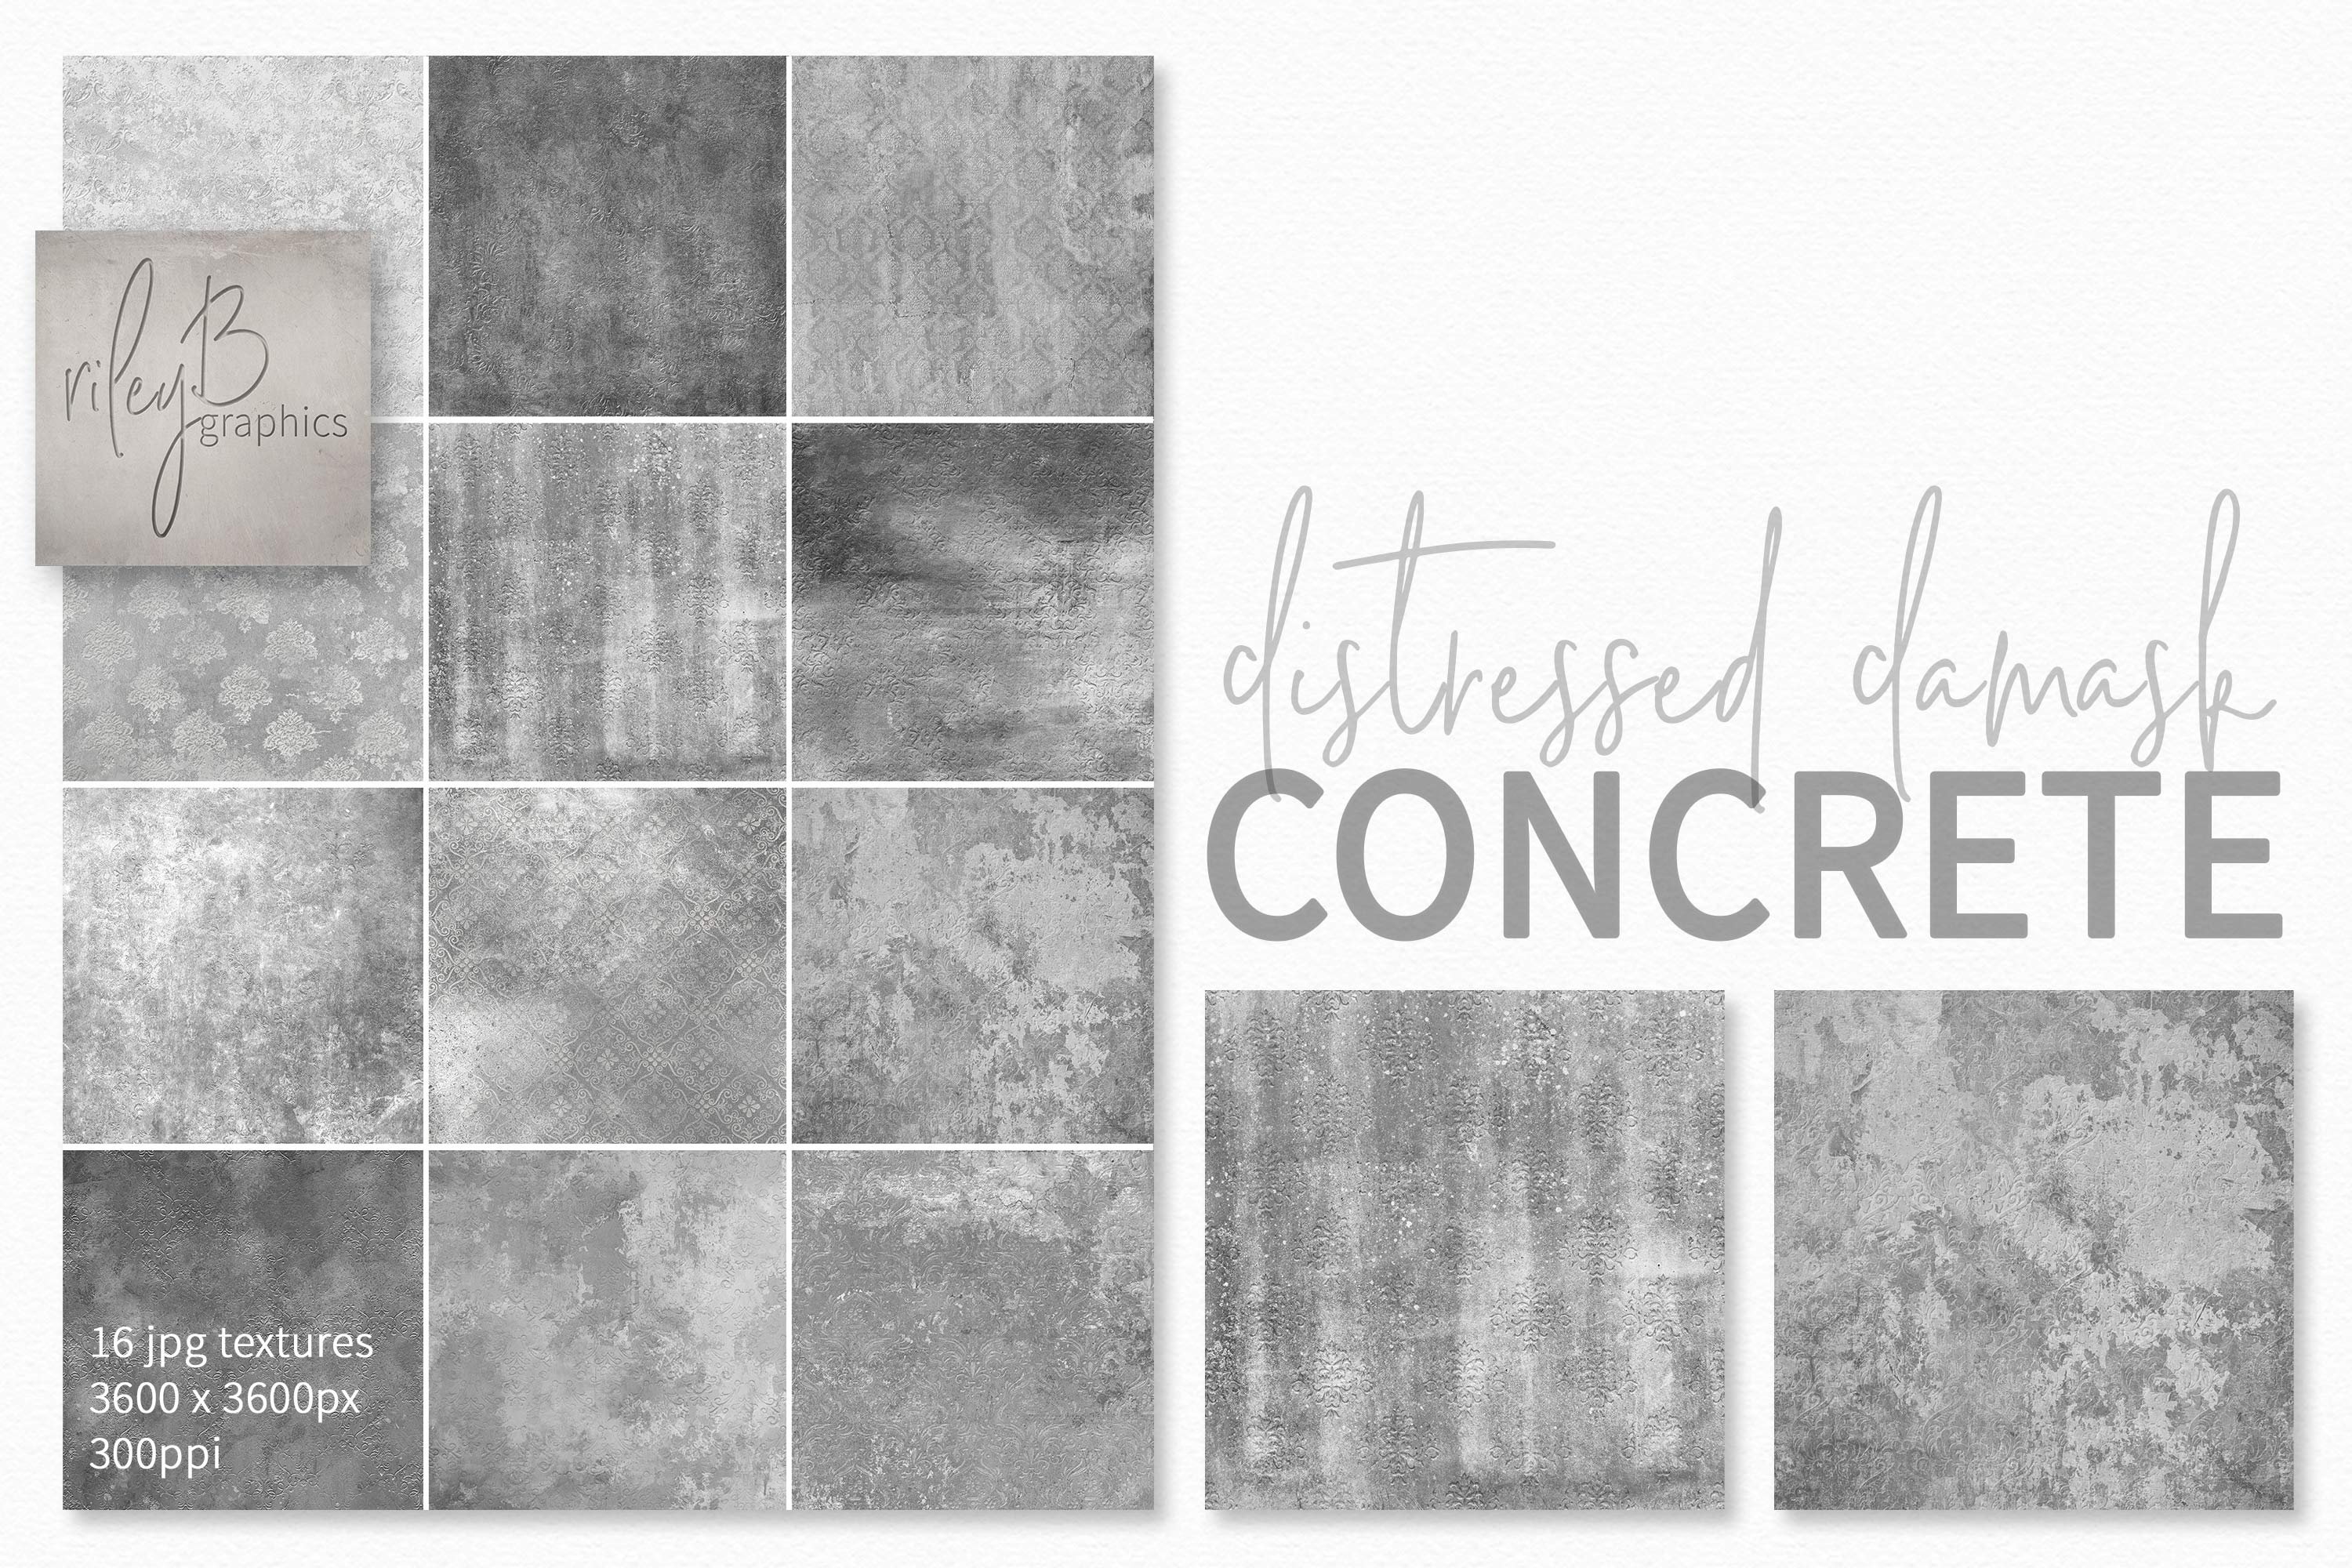 Distressed Damask Concrete Textures cover image.